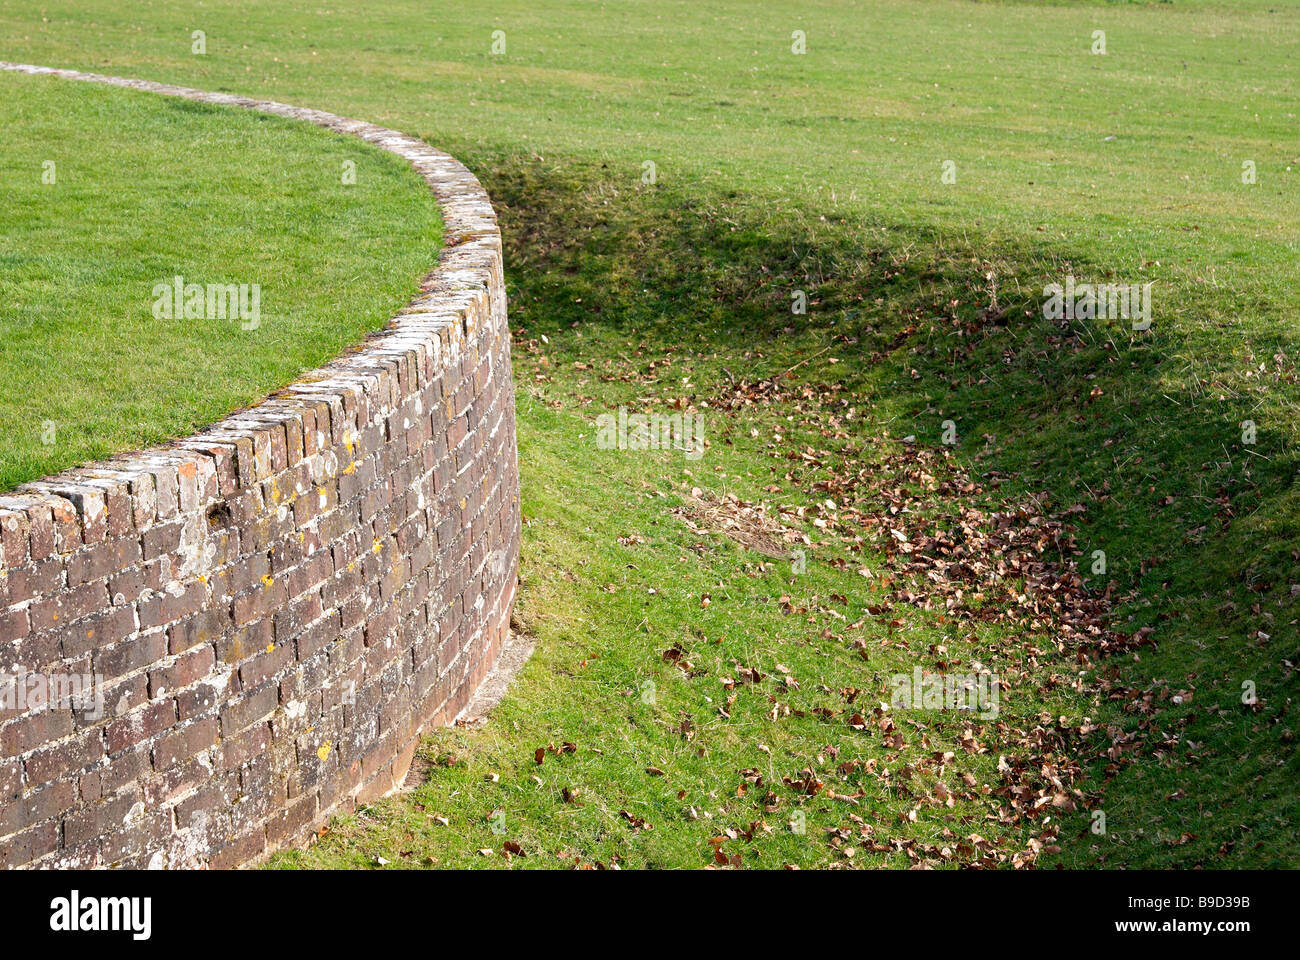 Garden Ha Ha Wall High Resolution Stock Photography And Images Alamy